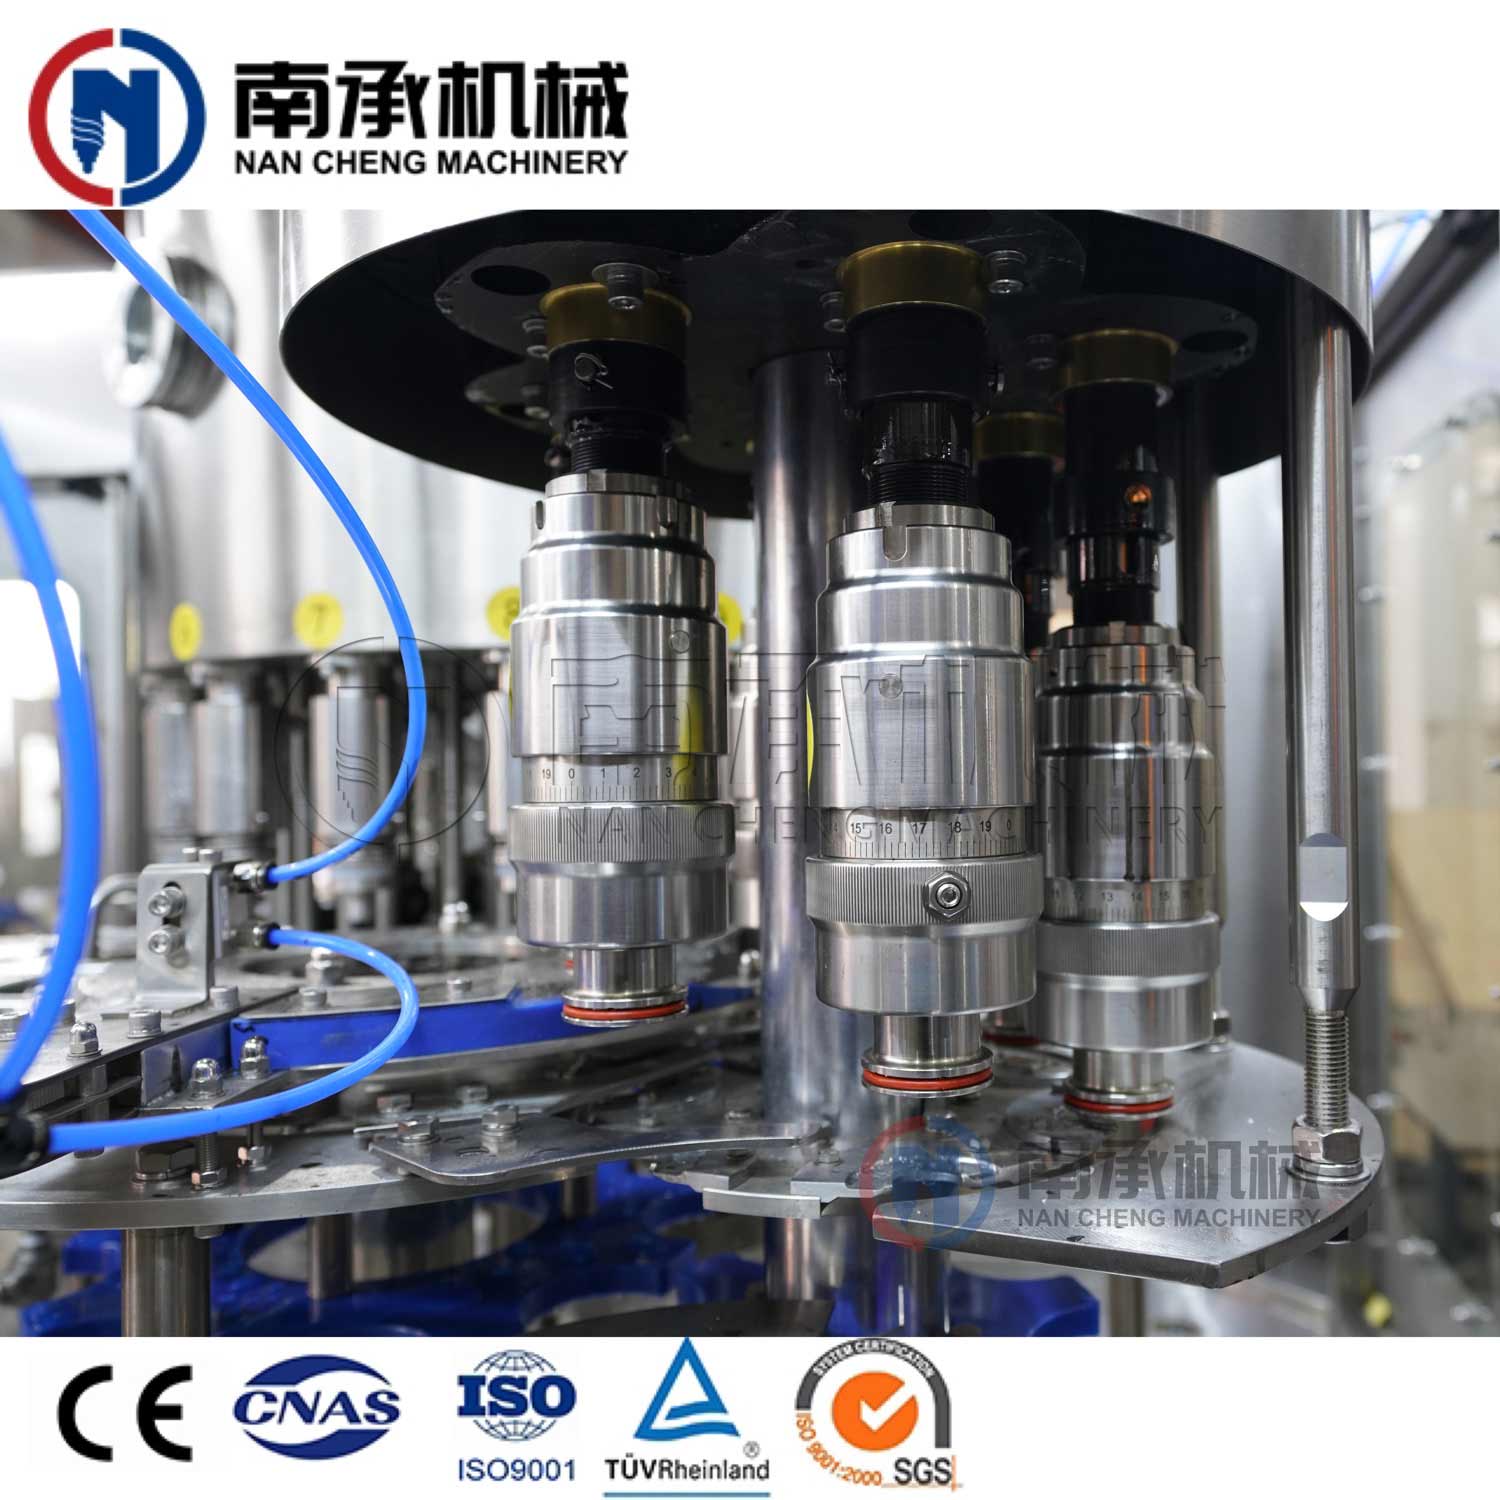 10000BPH Automatic Beverage/ Juice /Tea  Washing Filling Capping 3-in-1machine